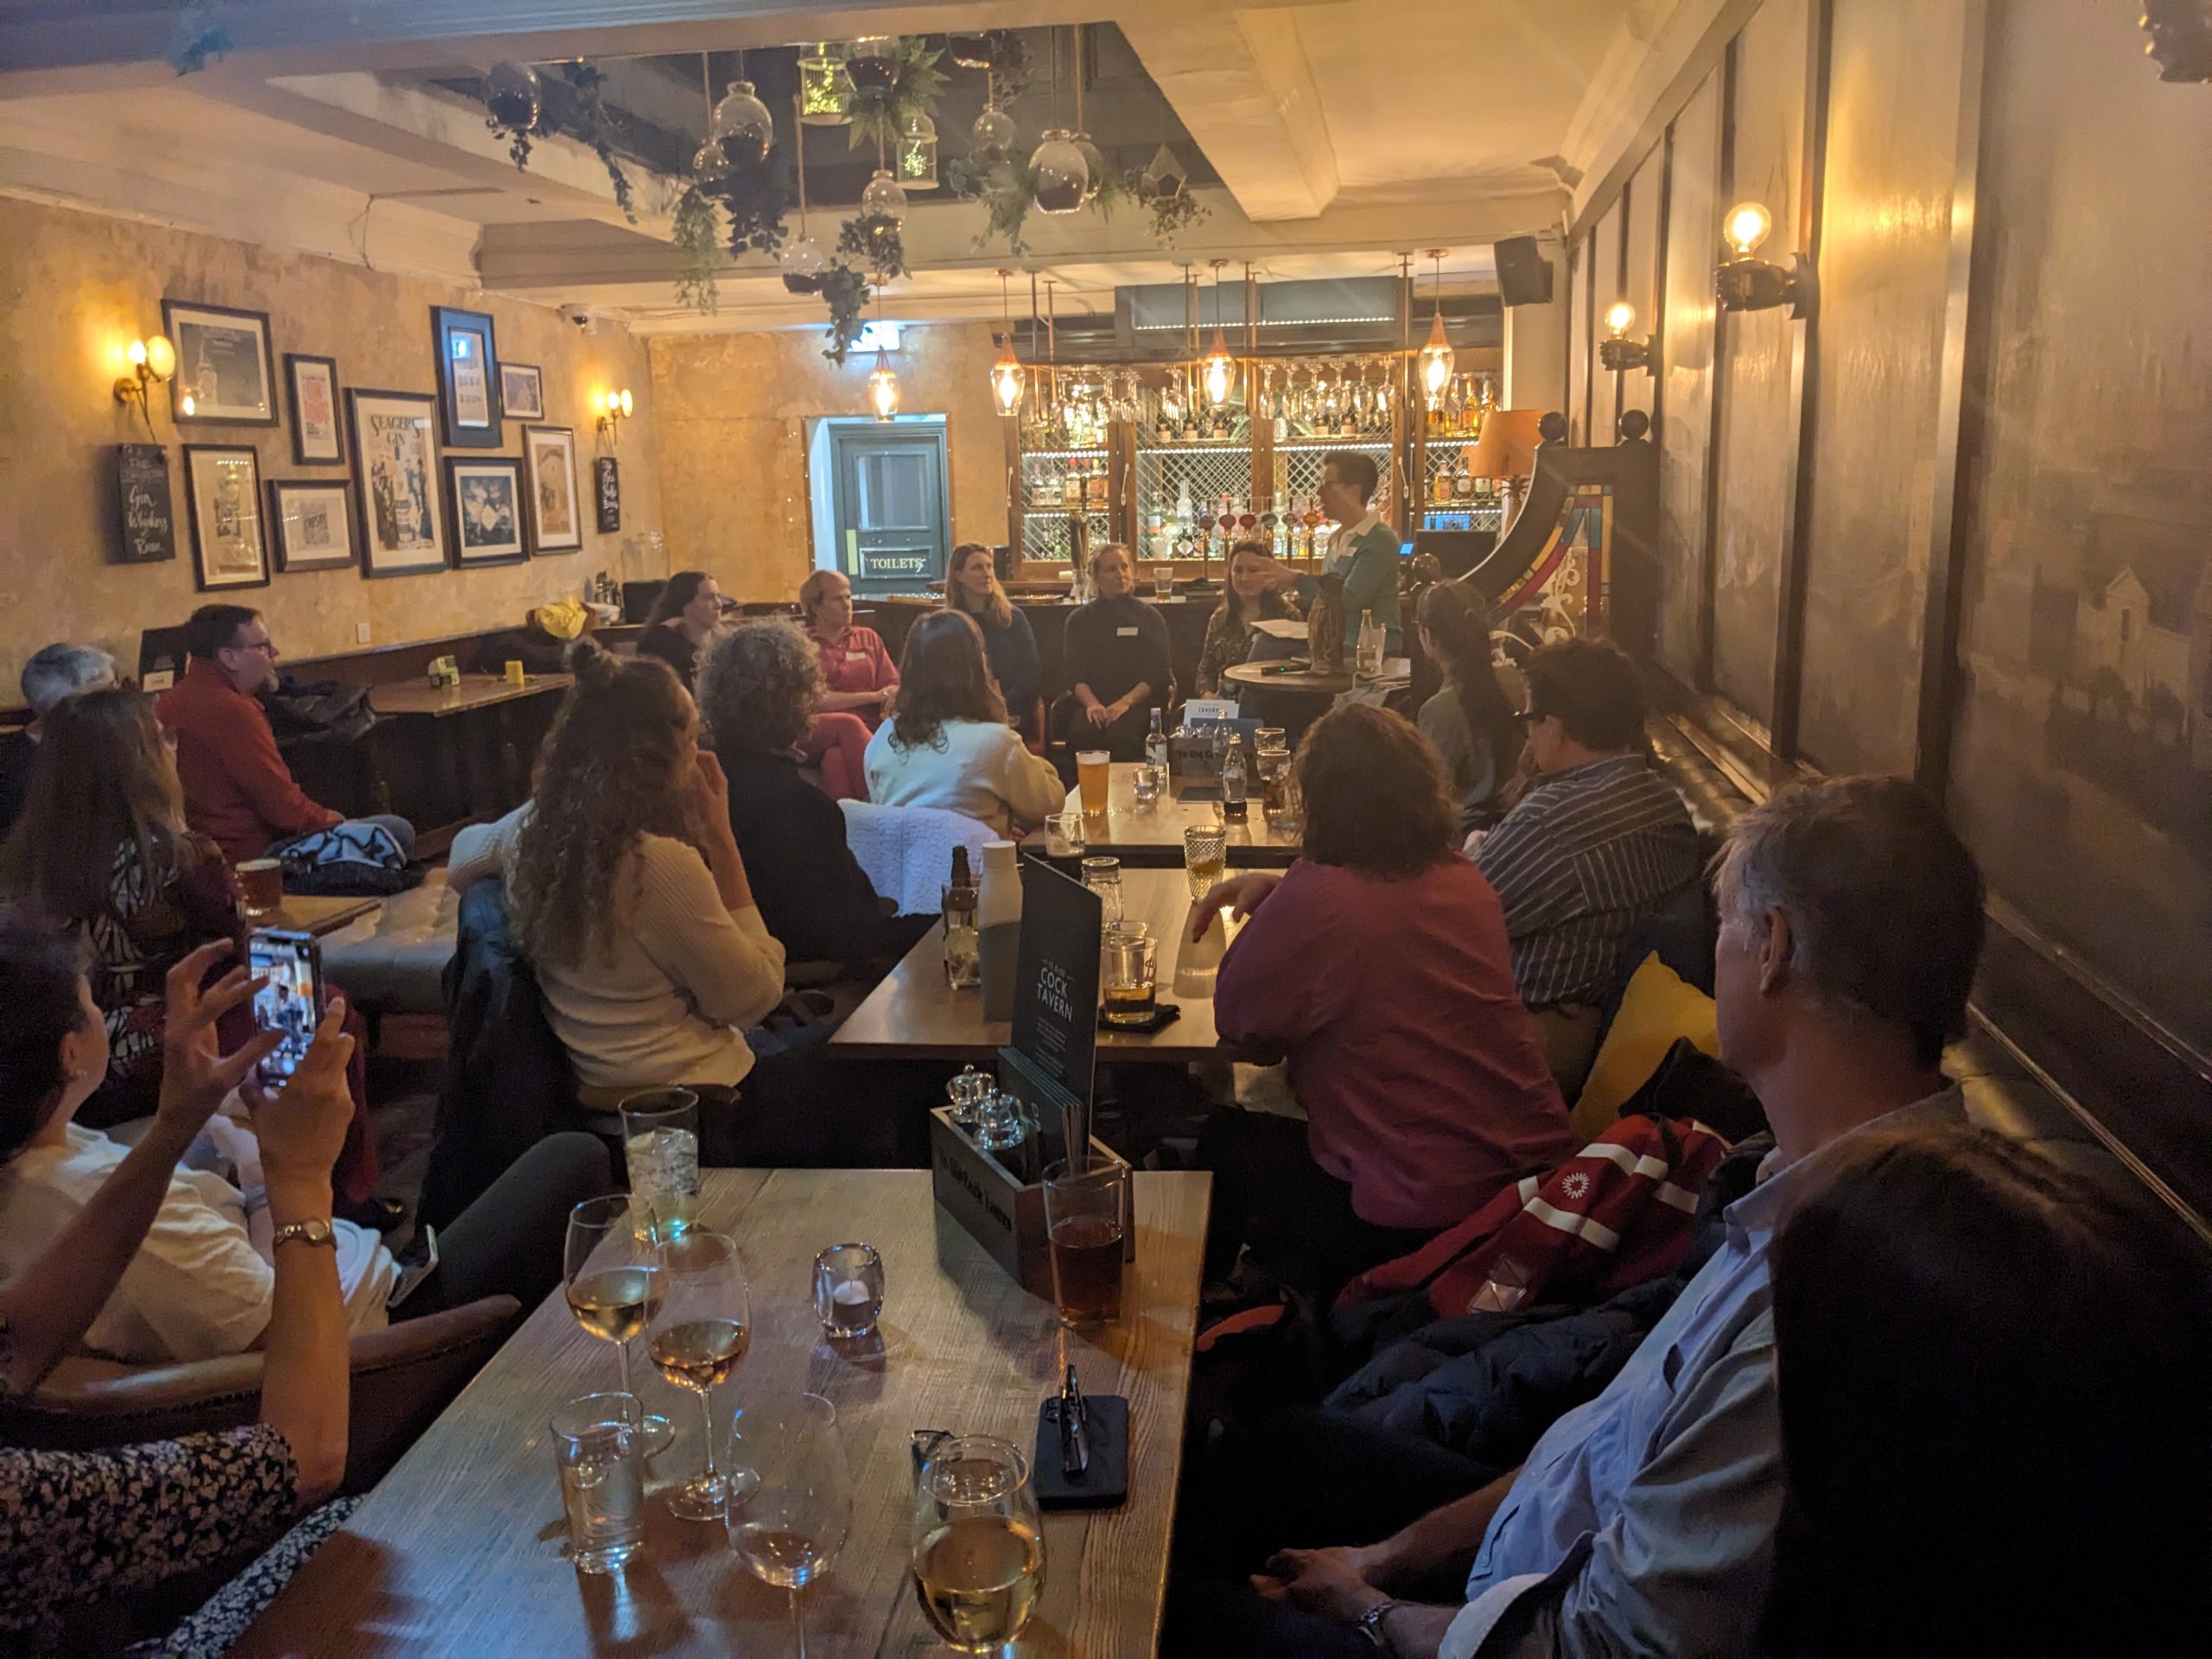 A group gathered informally around tables in a pub, watching a panel discussion.  The majority of the people in the photograph are women. 